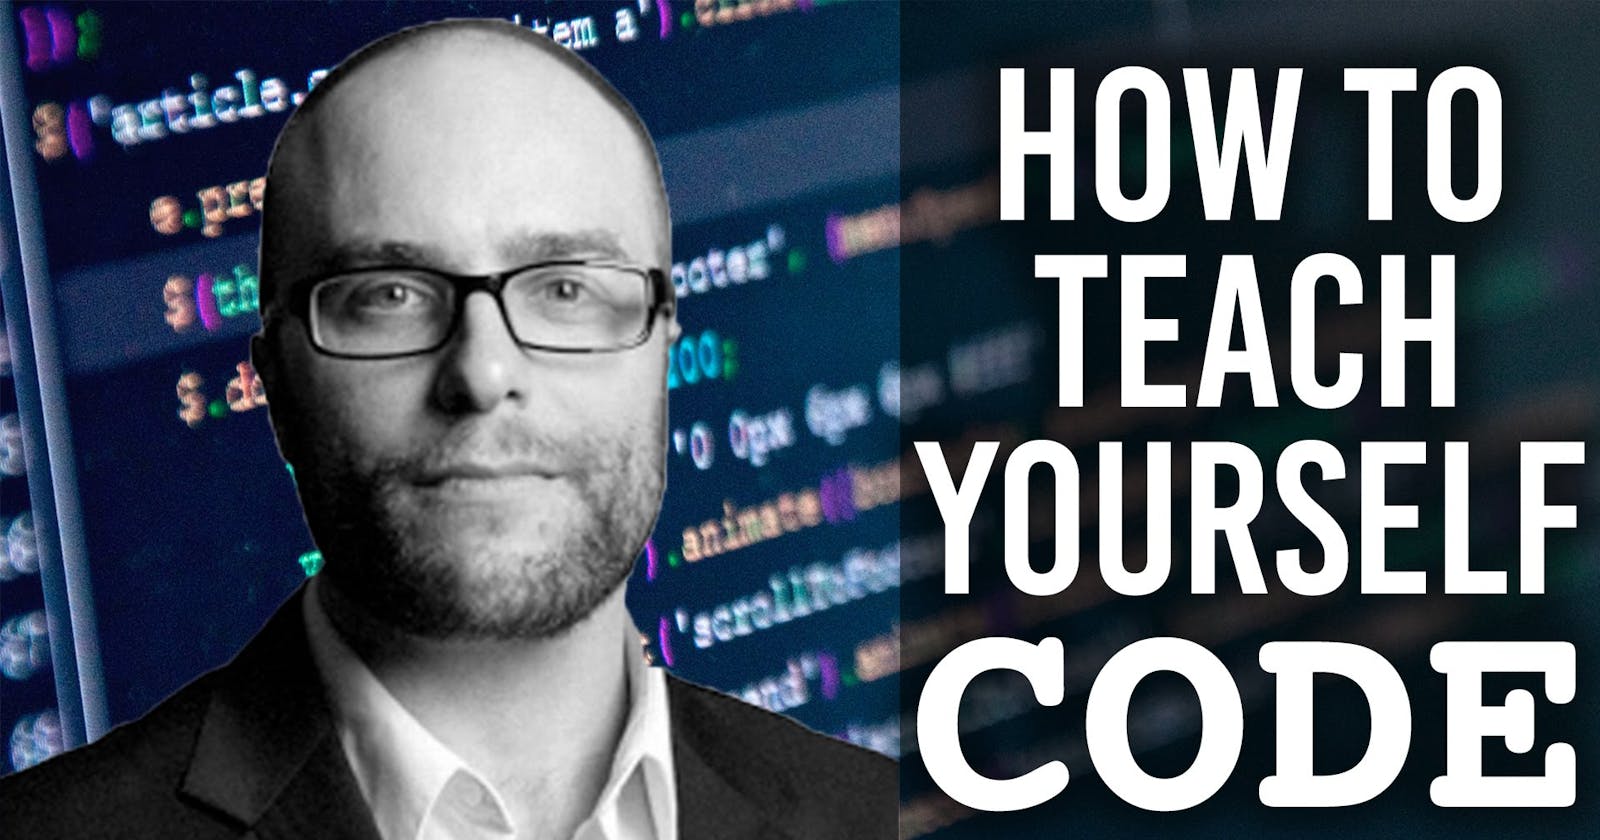 How To Teach Yourself Code (ft. Quincy Larson)